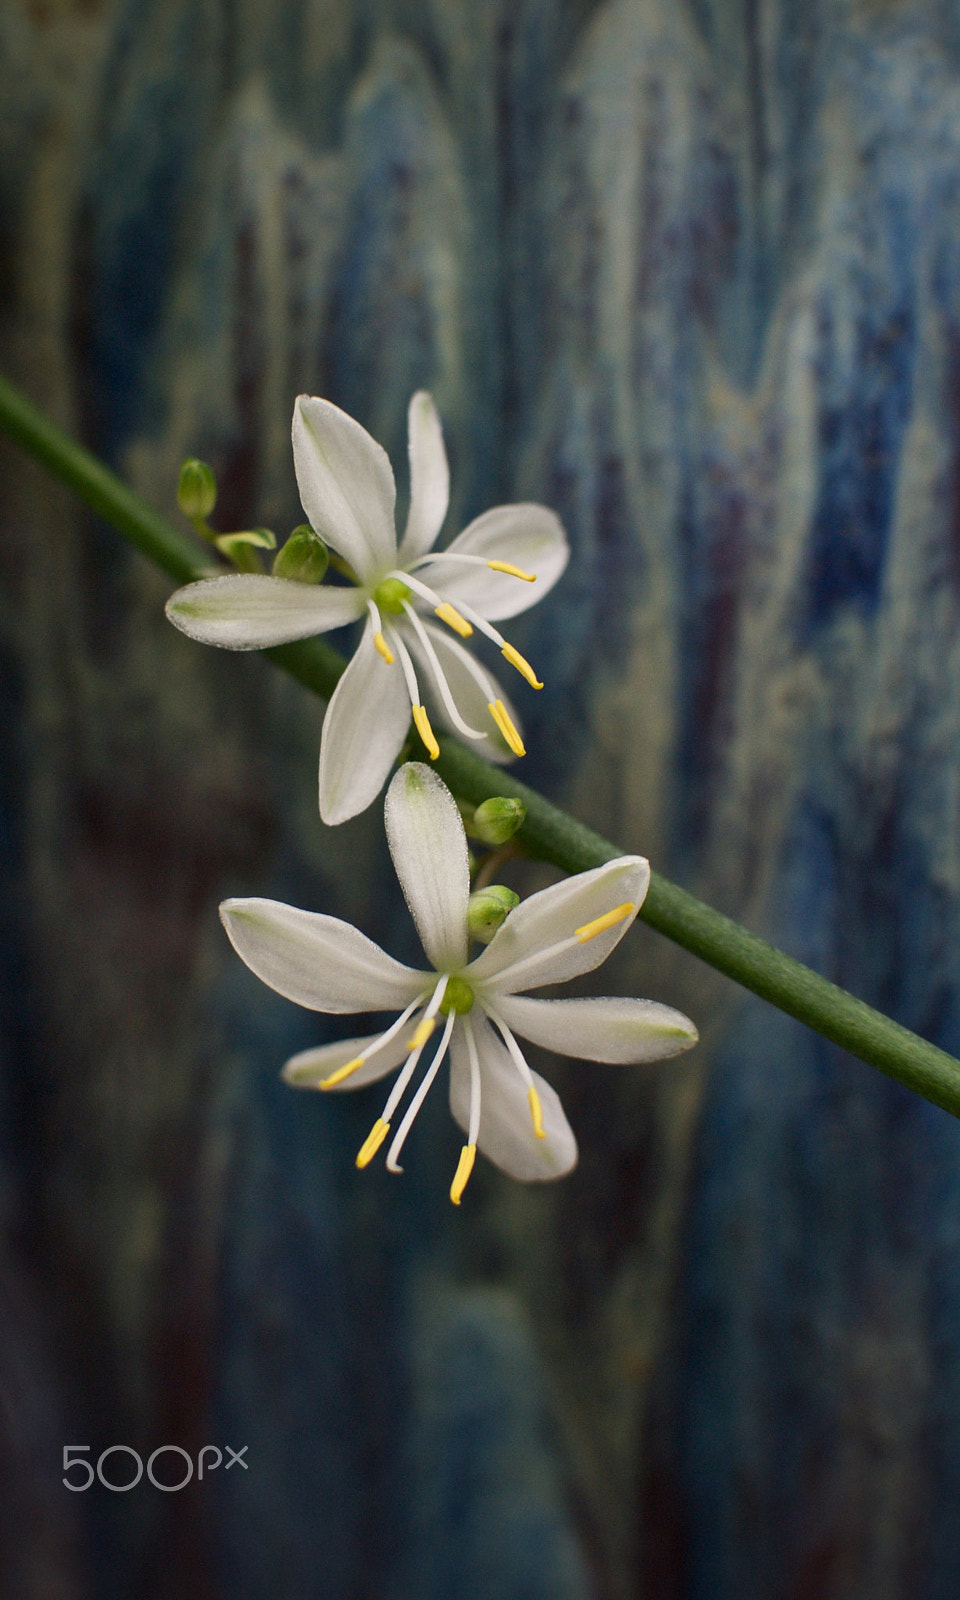 Nikon 1 J2 sample photo. Spider plant in bloom photography